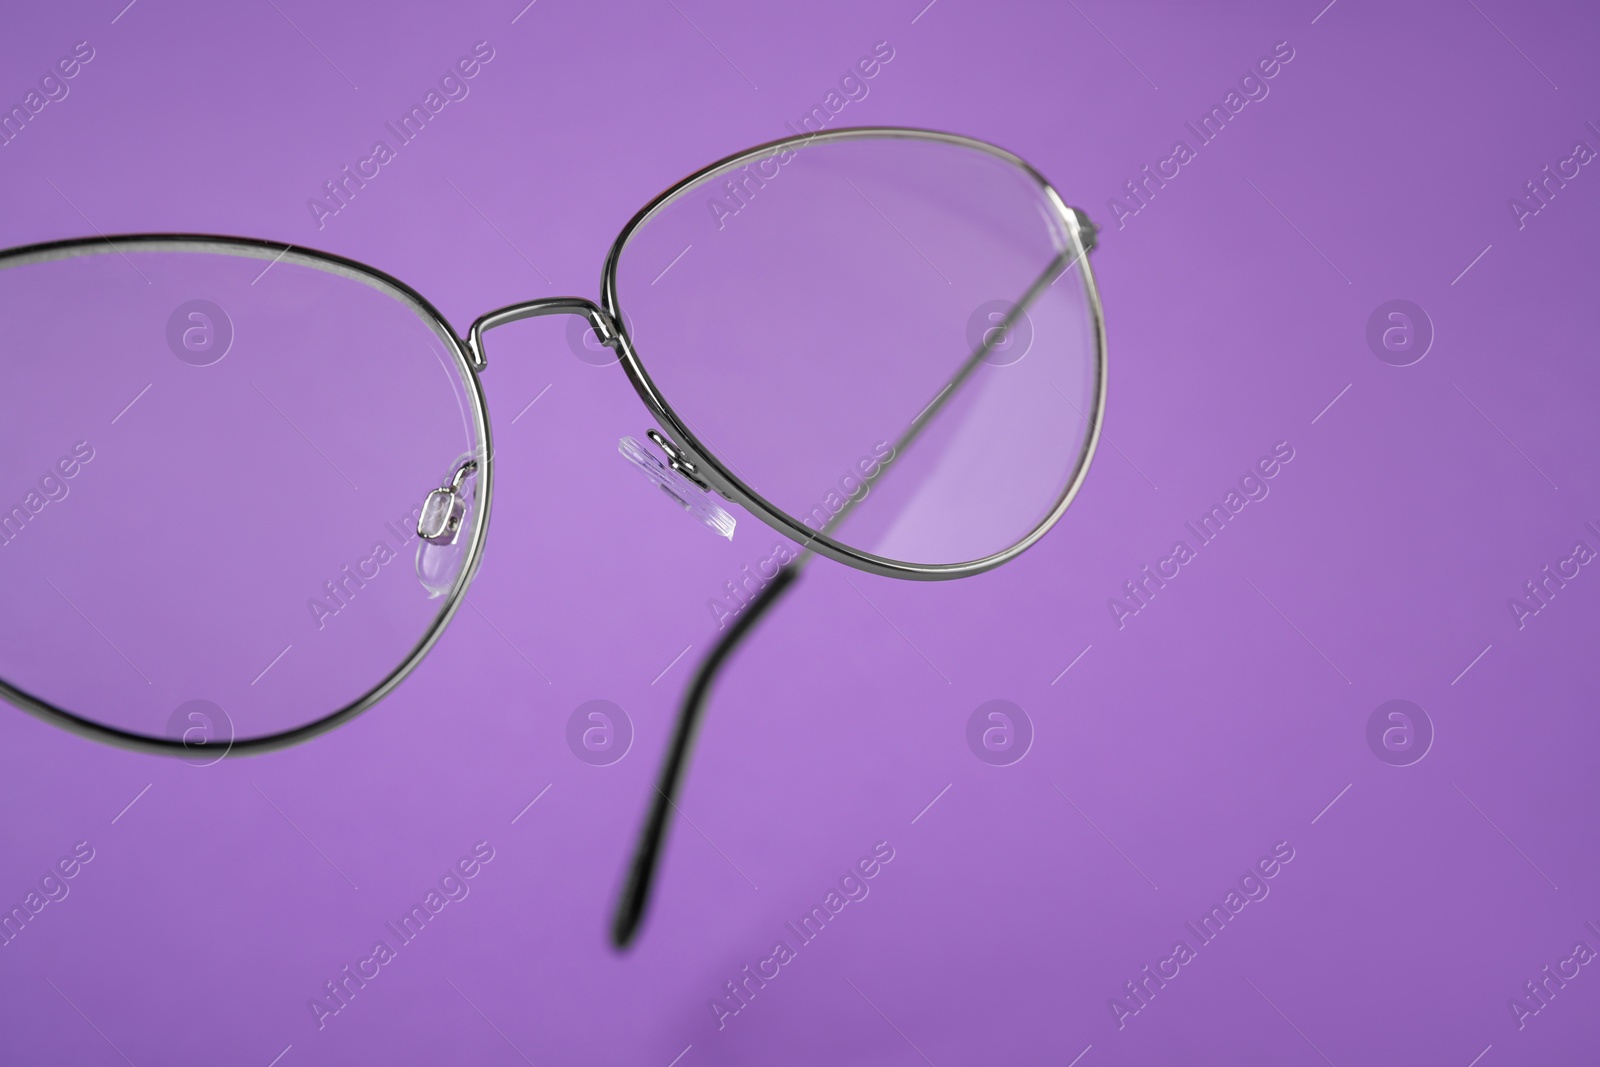 Photo of Stylish pair of glasses with metal frame on purple background, closeup